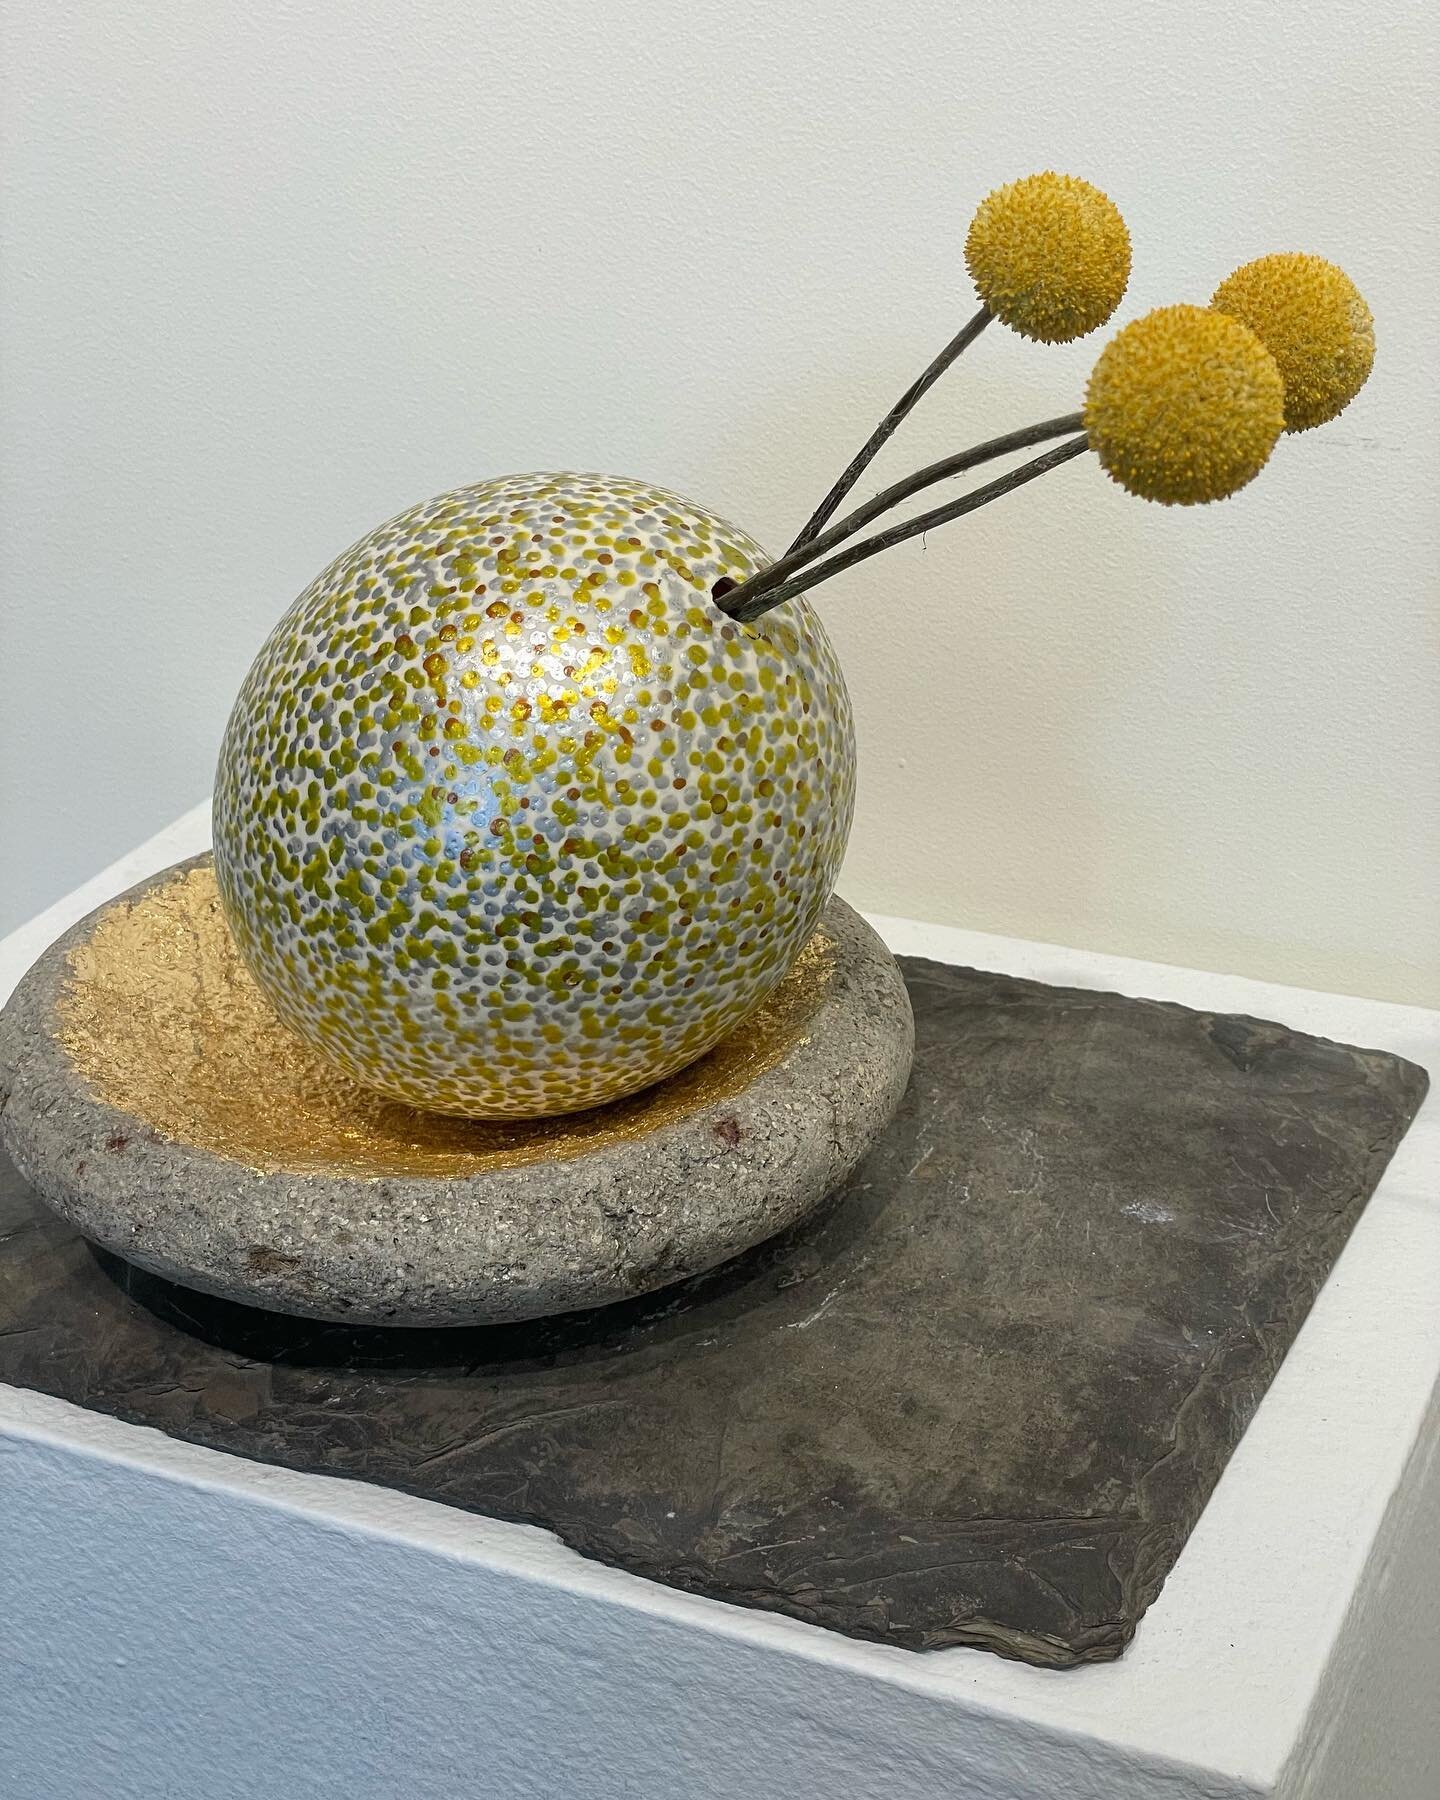 My entry to The Artists Archives of the Western Reserve-&ldquo;The Egg &amp; The Obelisk&rdquo; fundraiser, held at the AAWR &amp; Lake View Cemetery, June 11,2023 from 5:30-7:00. Artist were given ostrich eggs- no limits to one&rsquo;s creations!#ju